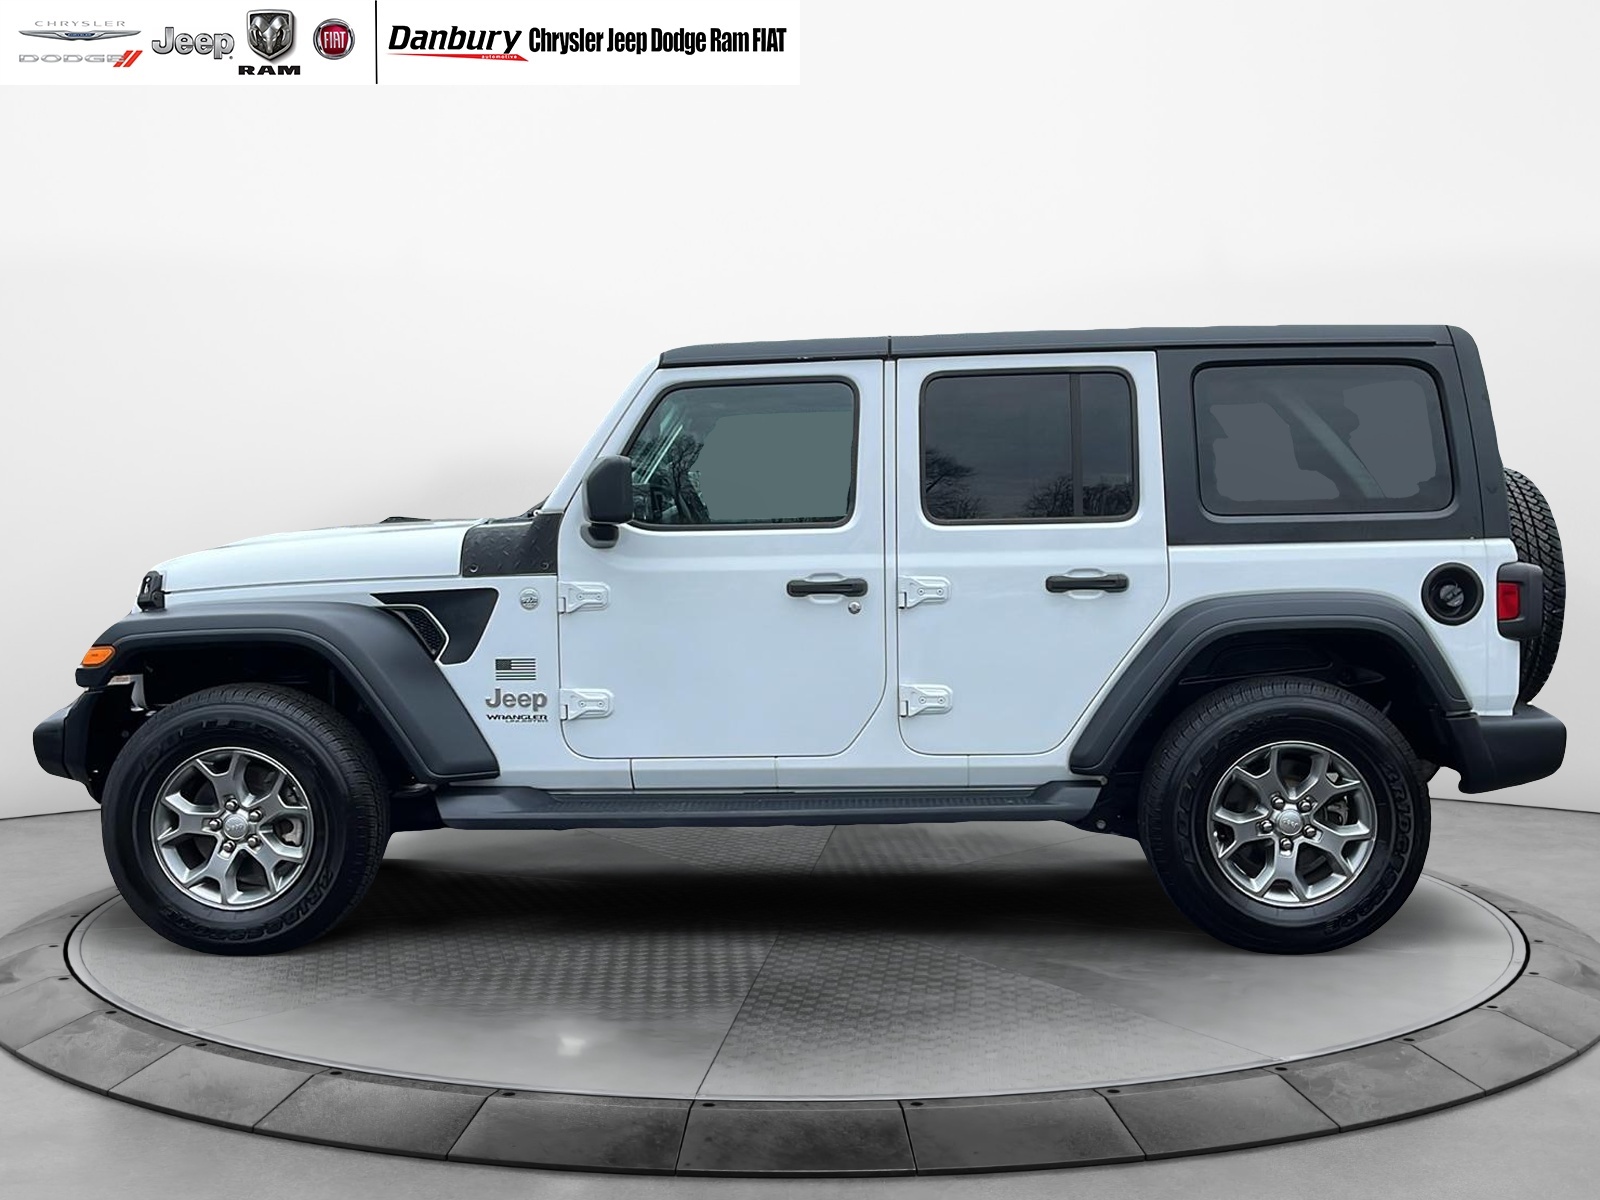 2020 Jeep Wrangler Unlimited Freedom 5